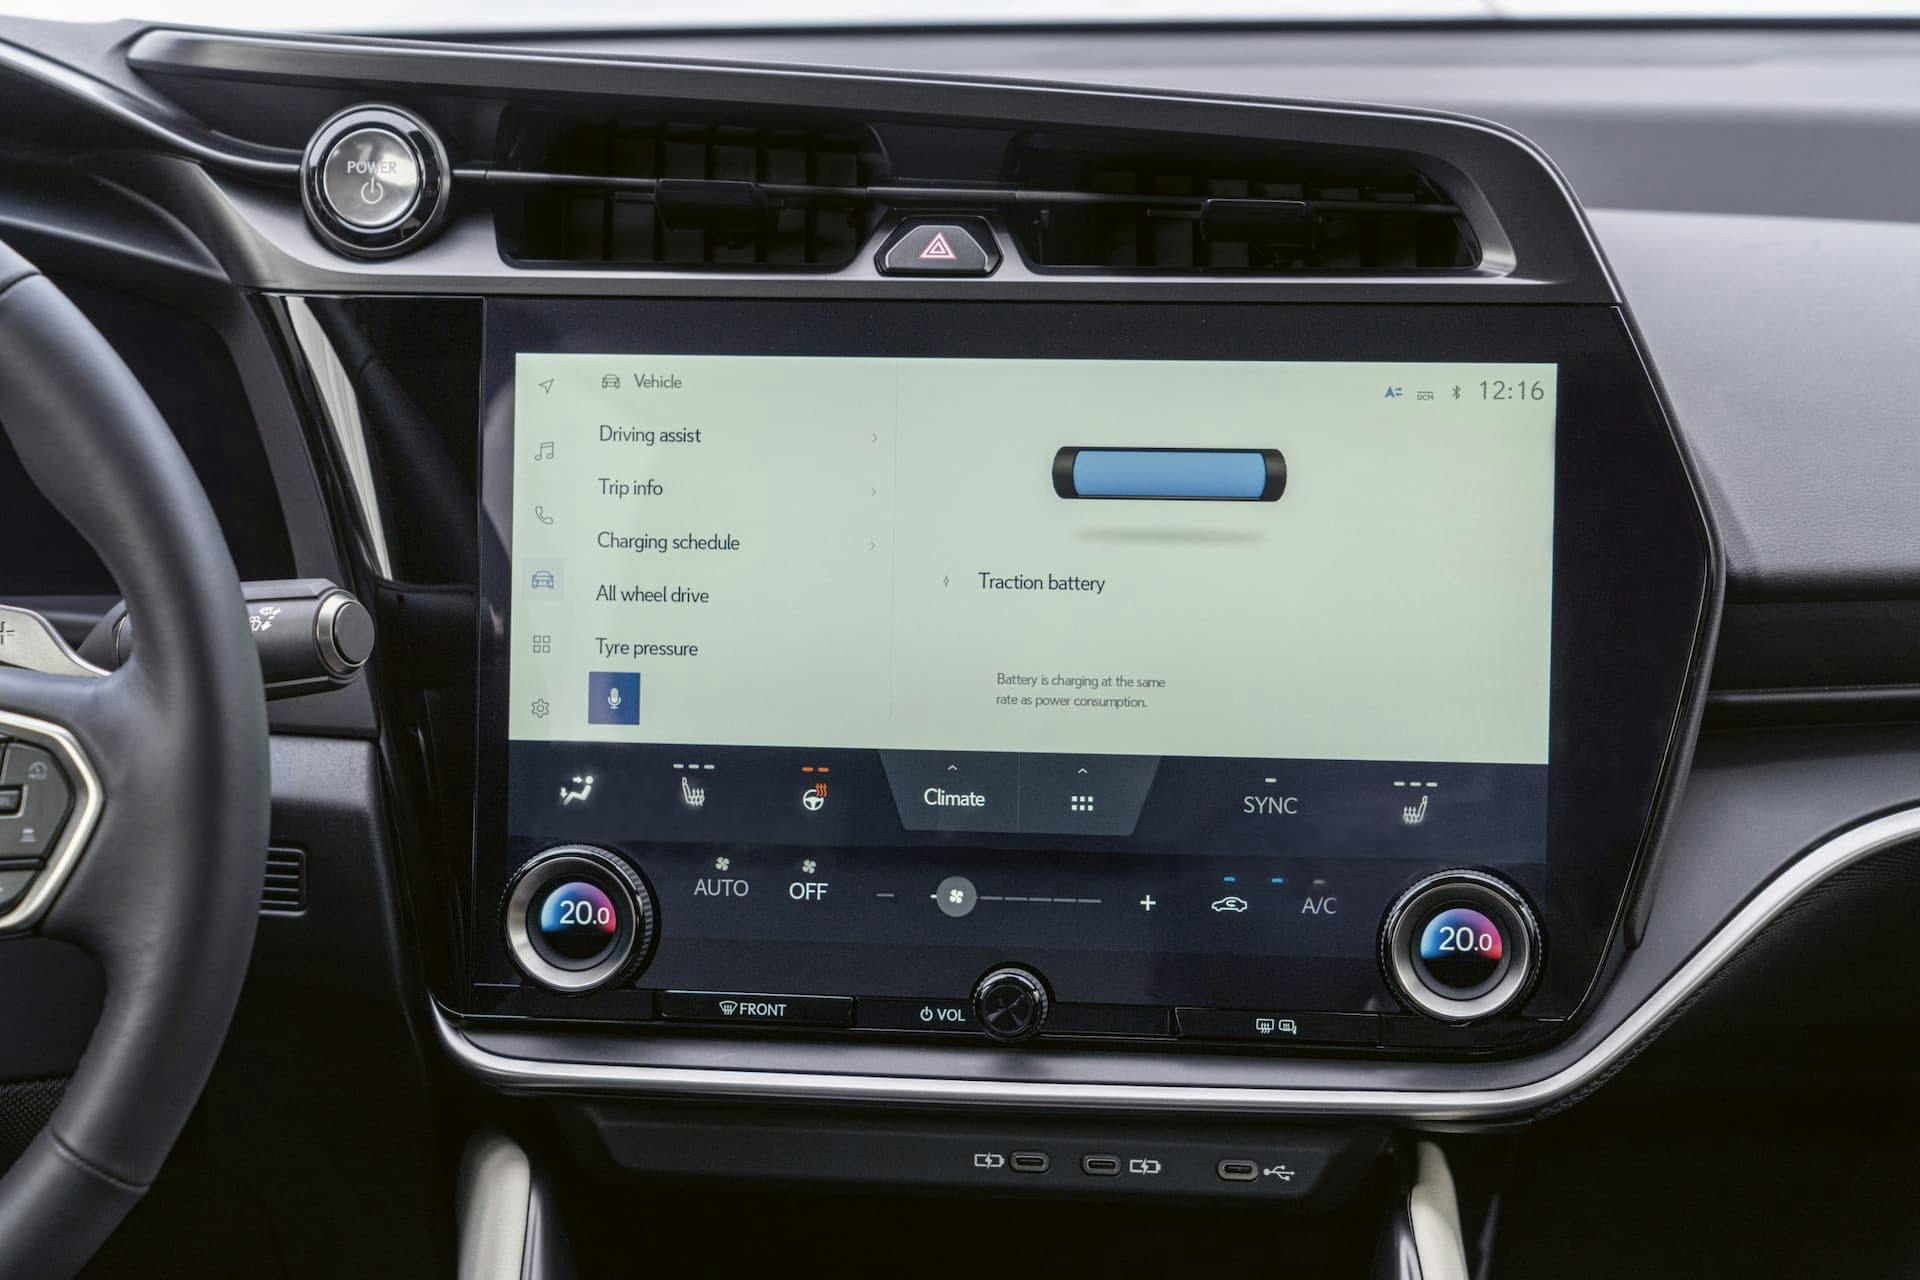 Lexus RZ touchscreen showing traction battery settings page